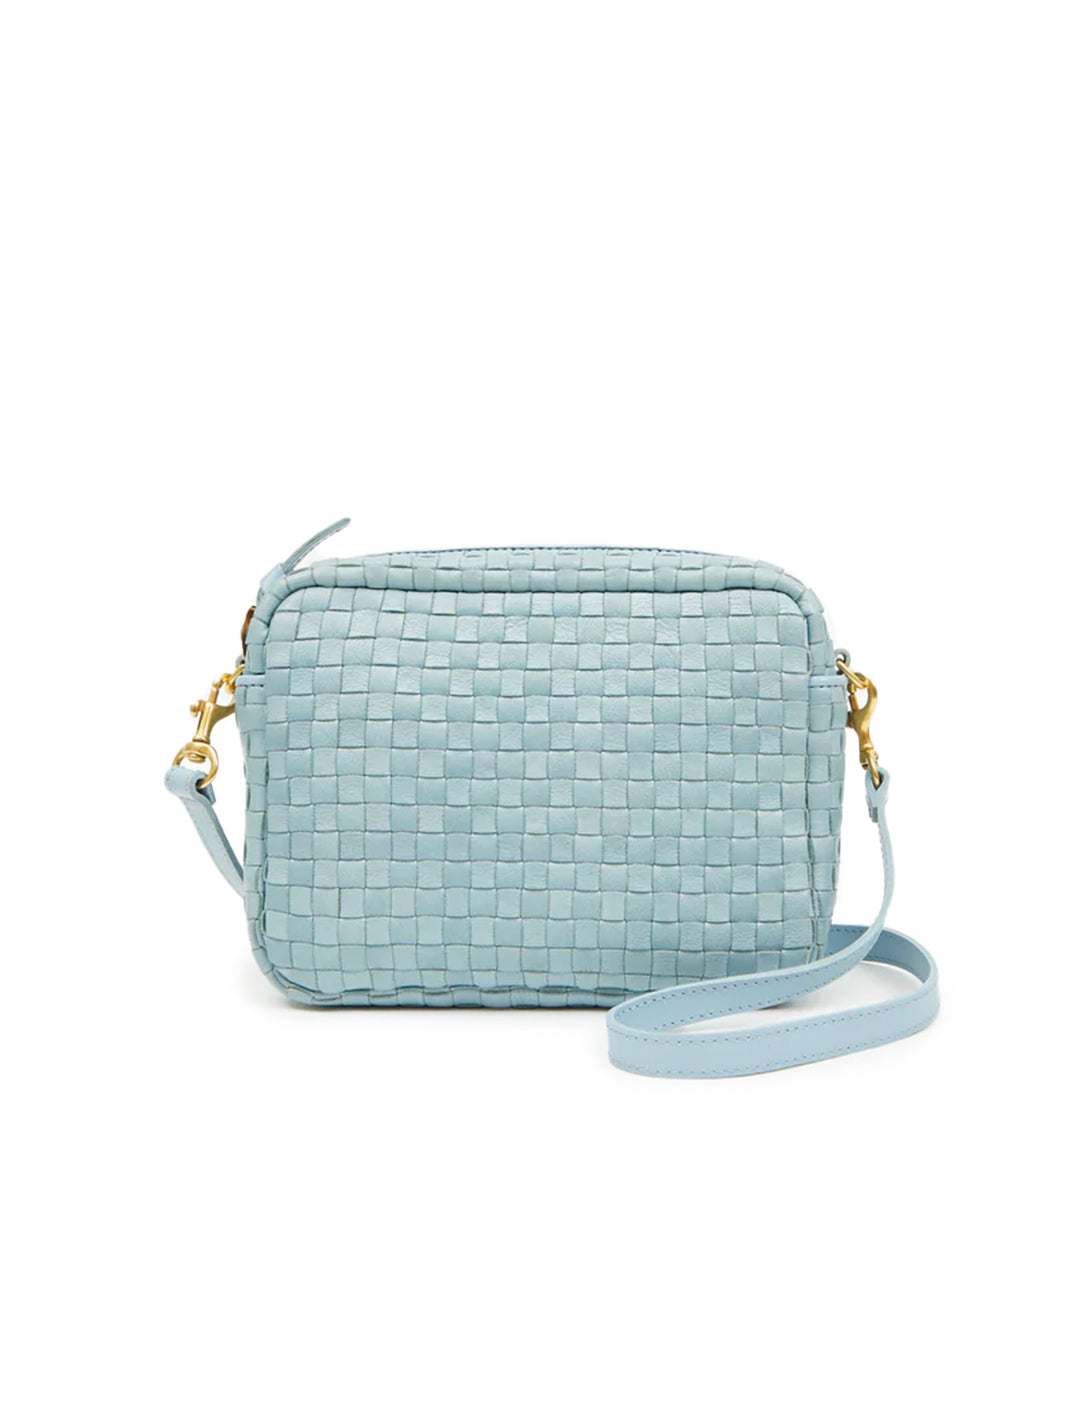 Front view of Clare V.'s midi sac in sunbleached sky blue woven.